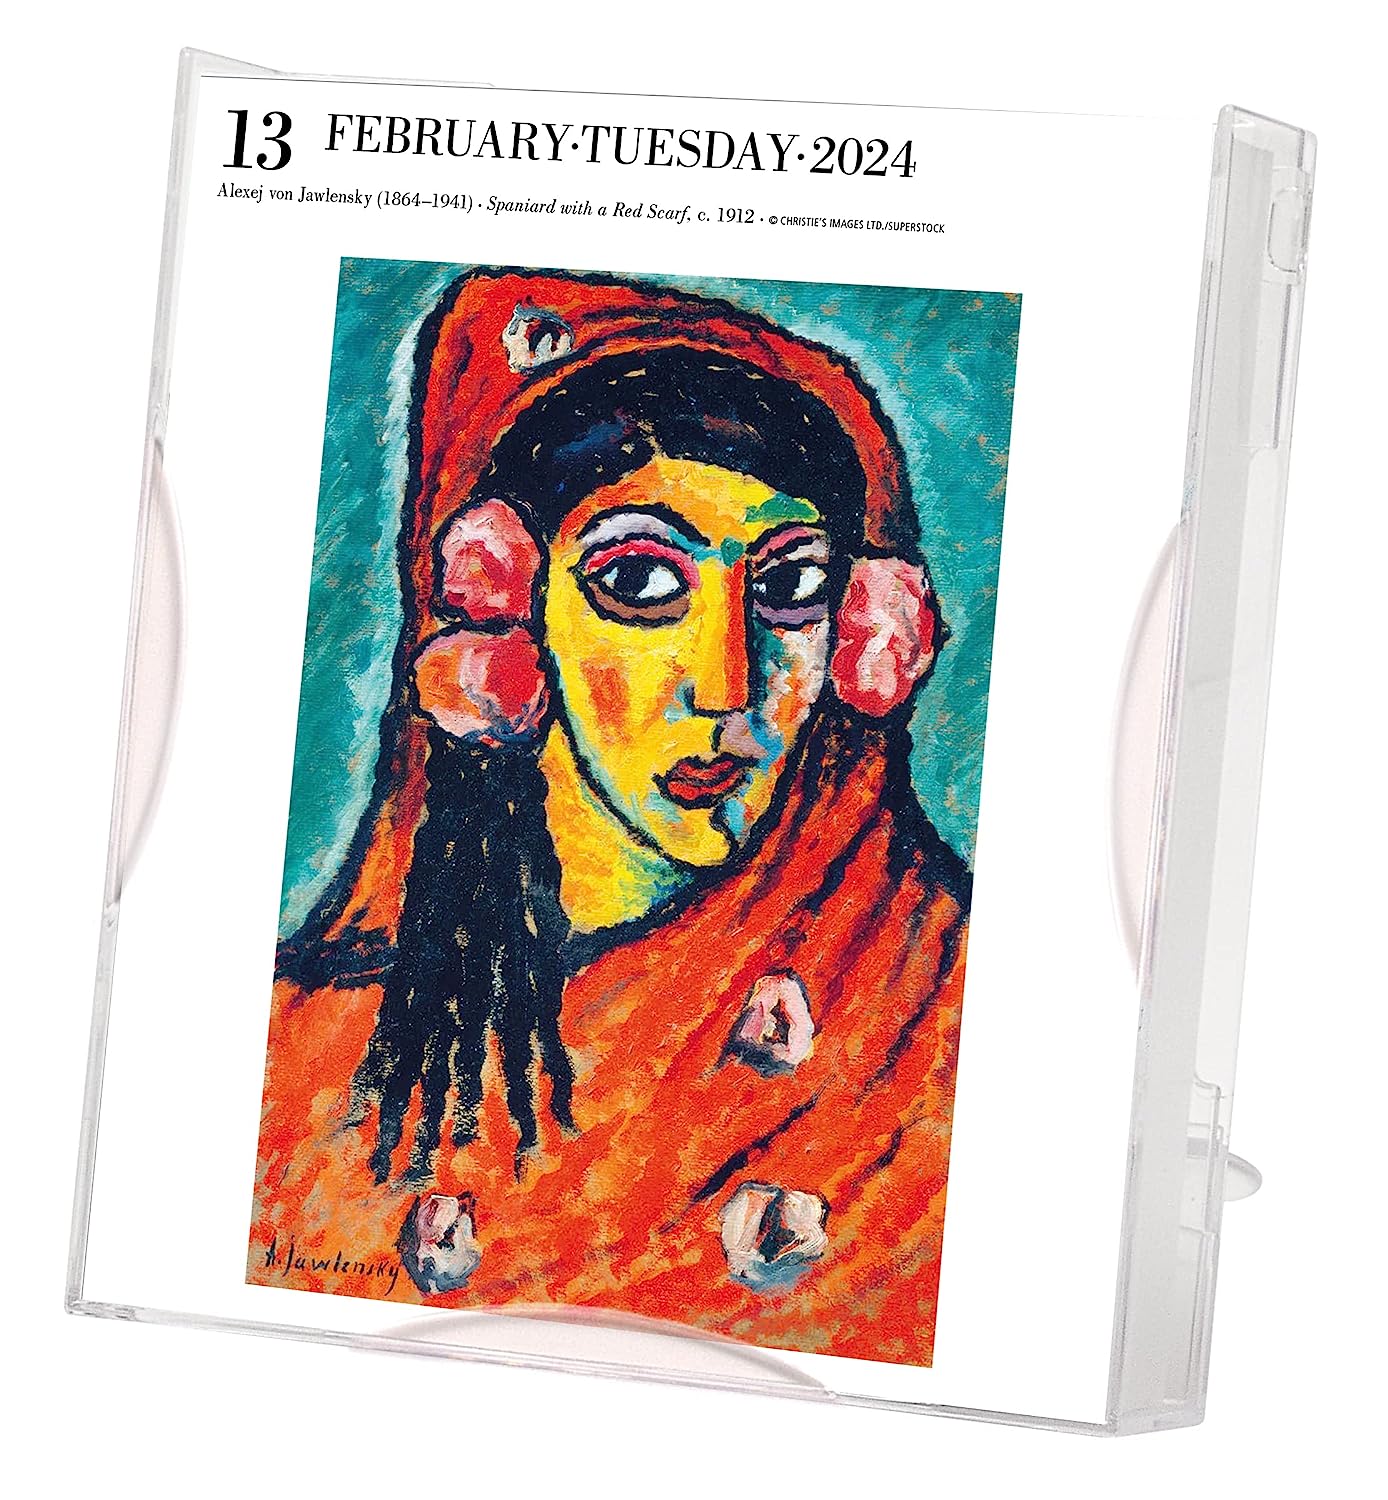 2024 Art Gallery - Daily Boxed Page-A-Day Calendar